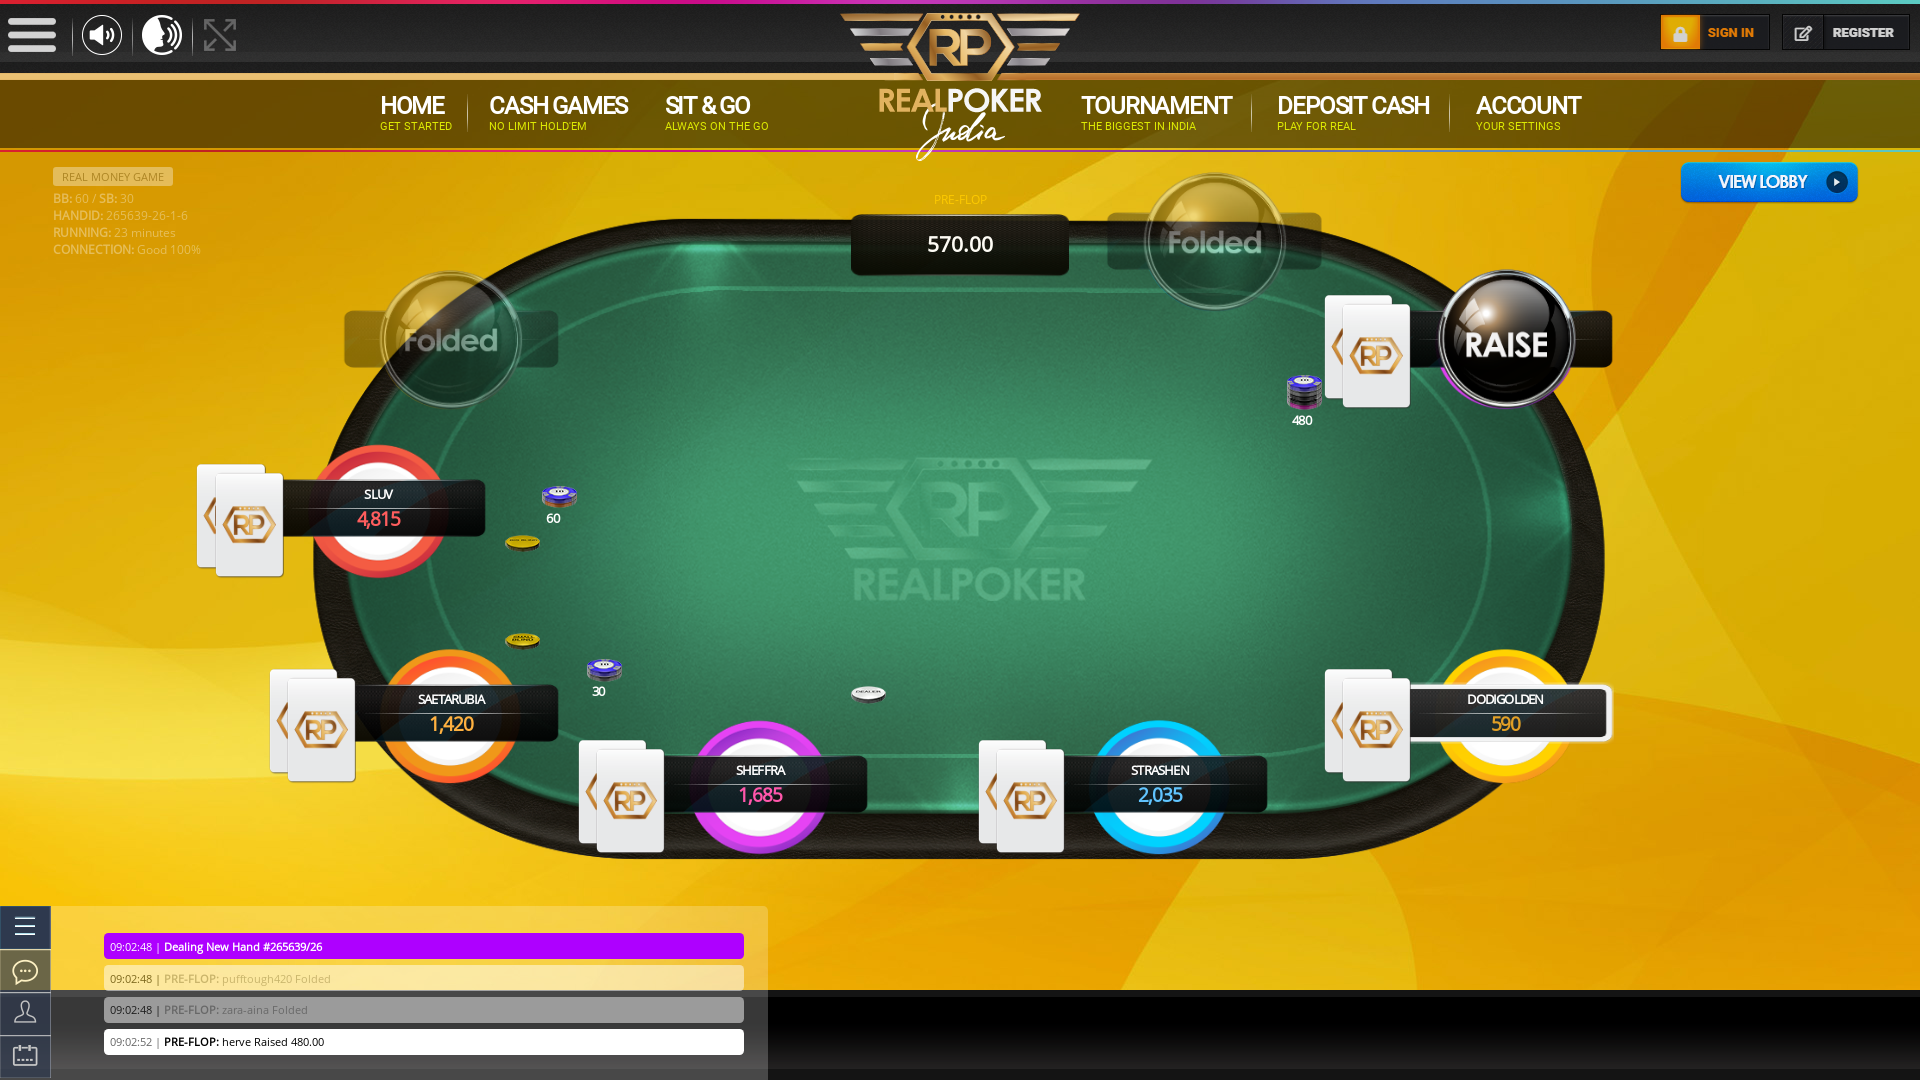 Howrah, Kolkata poker table on a 10 player table in the 23rd minute